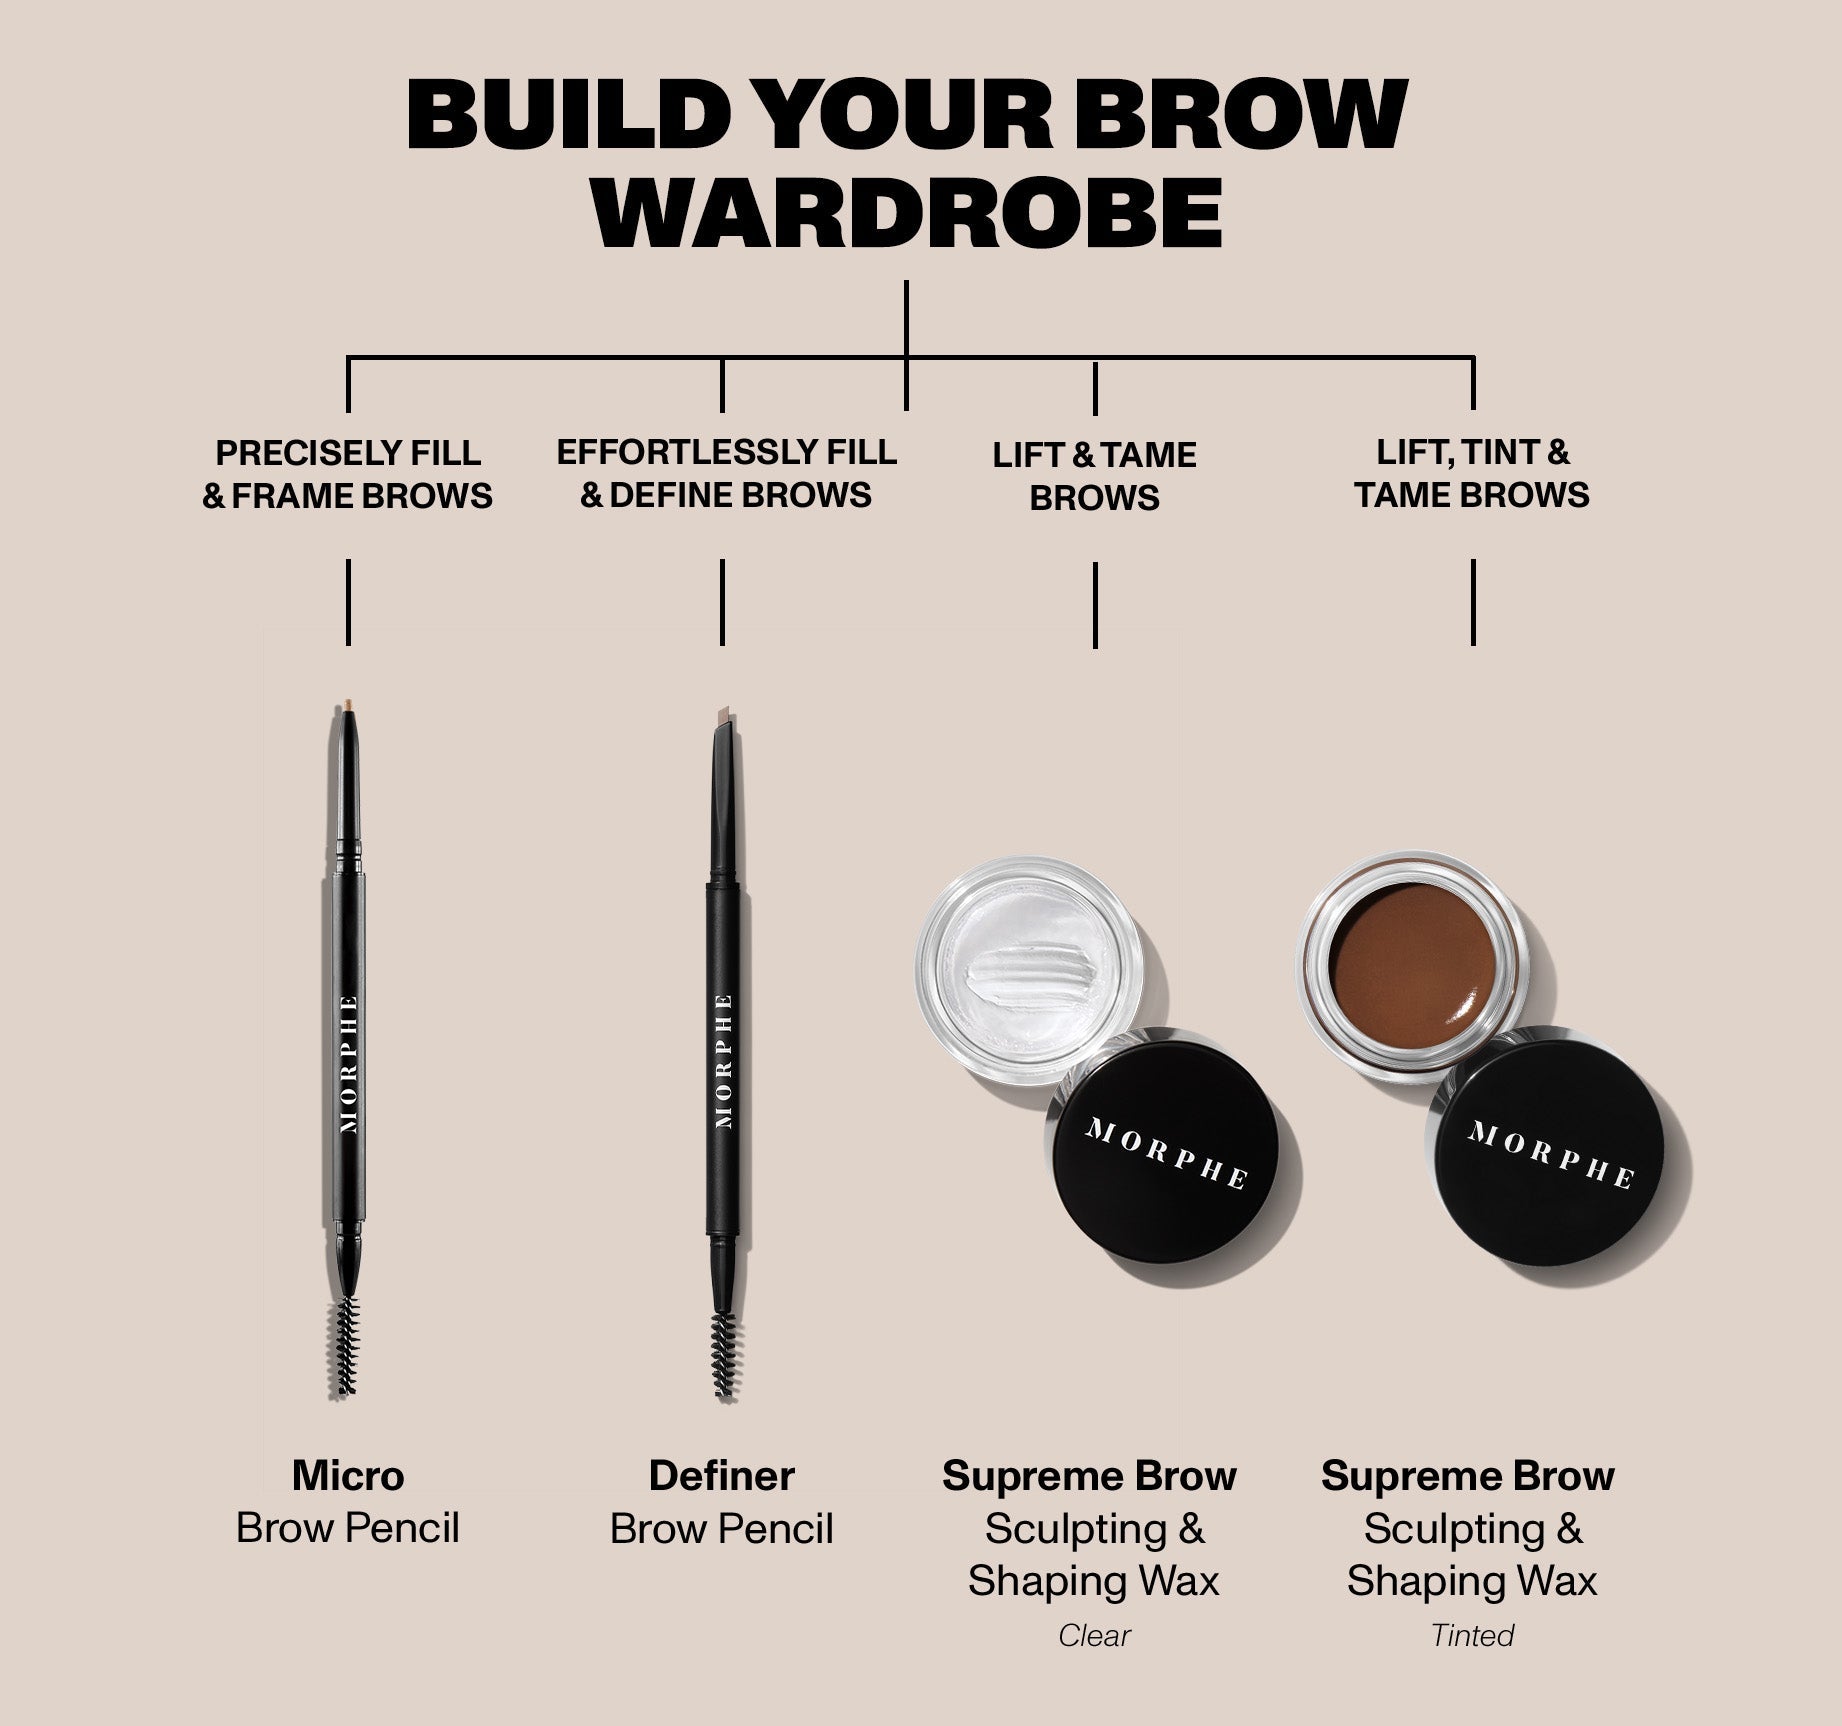 Definer Dual-Ended Brow Pencil & Spoolie - Biscotti - Image 8